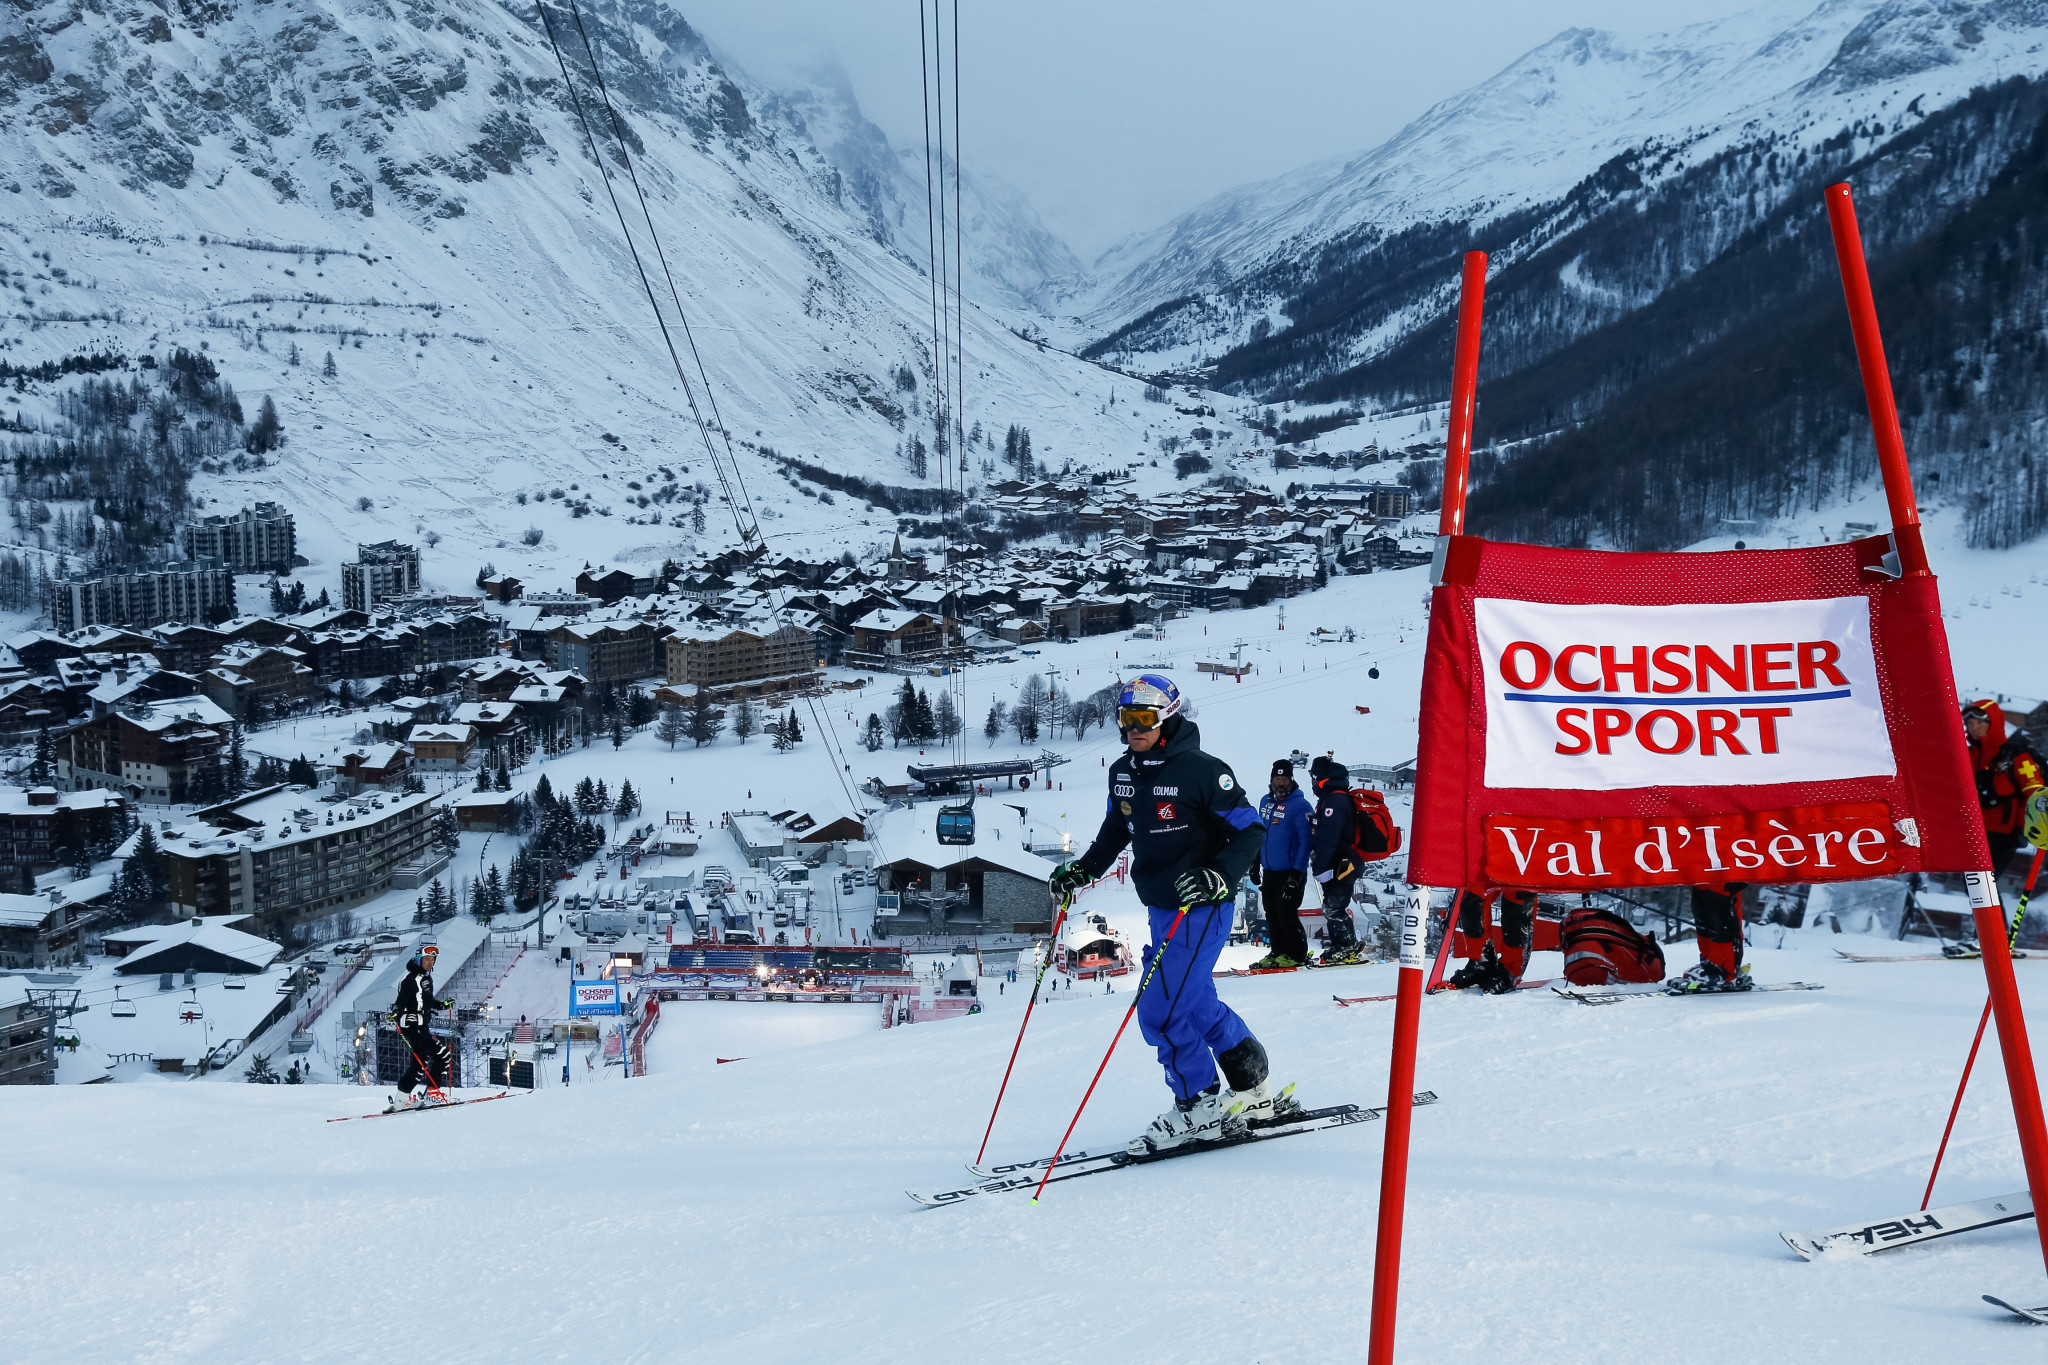 St Moritz and Val d’Isère prepared for classic FIS Alpine World Cup racing